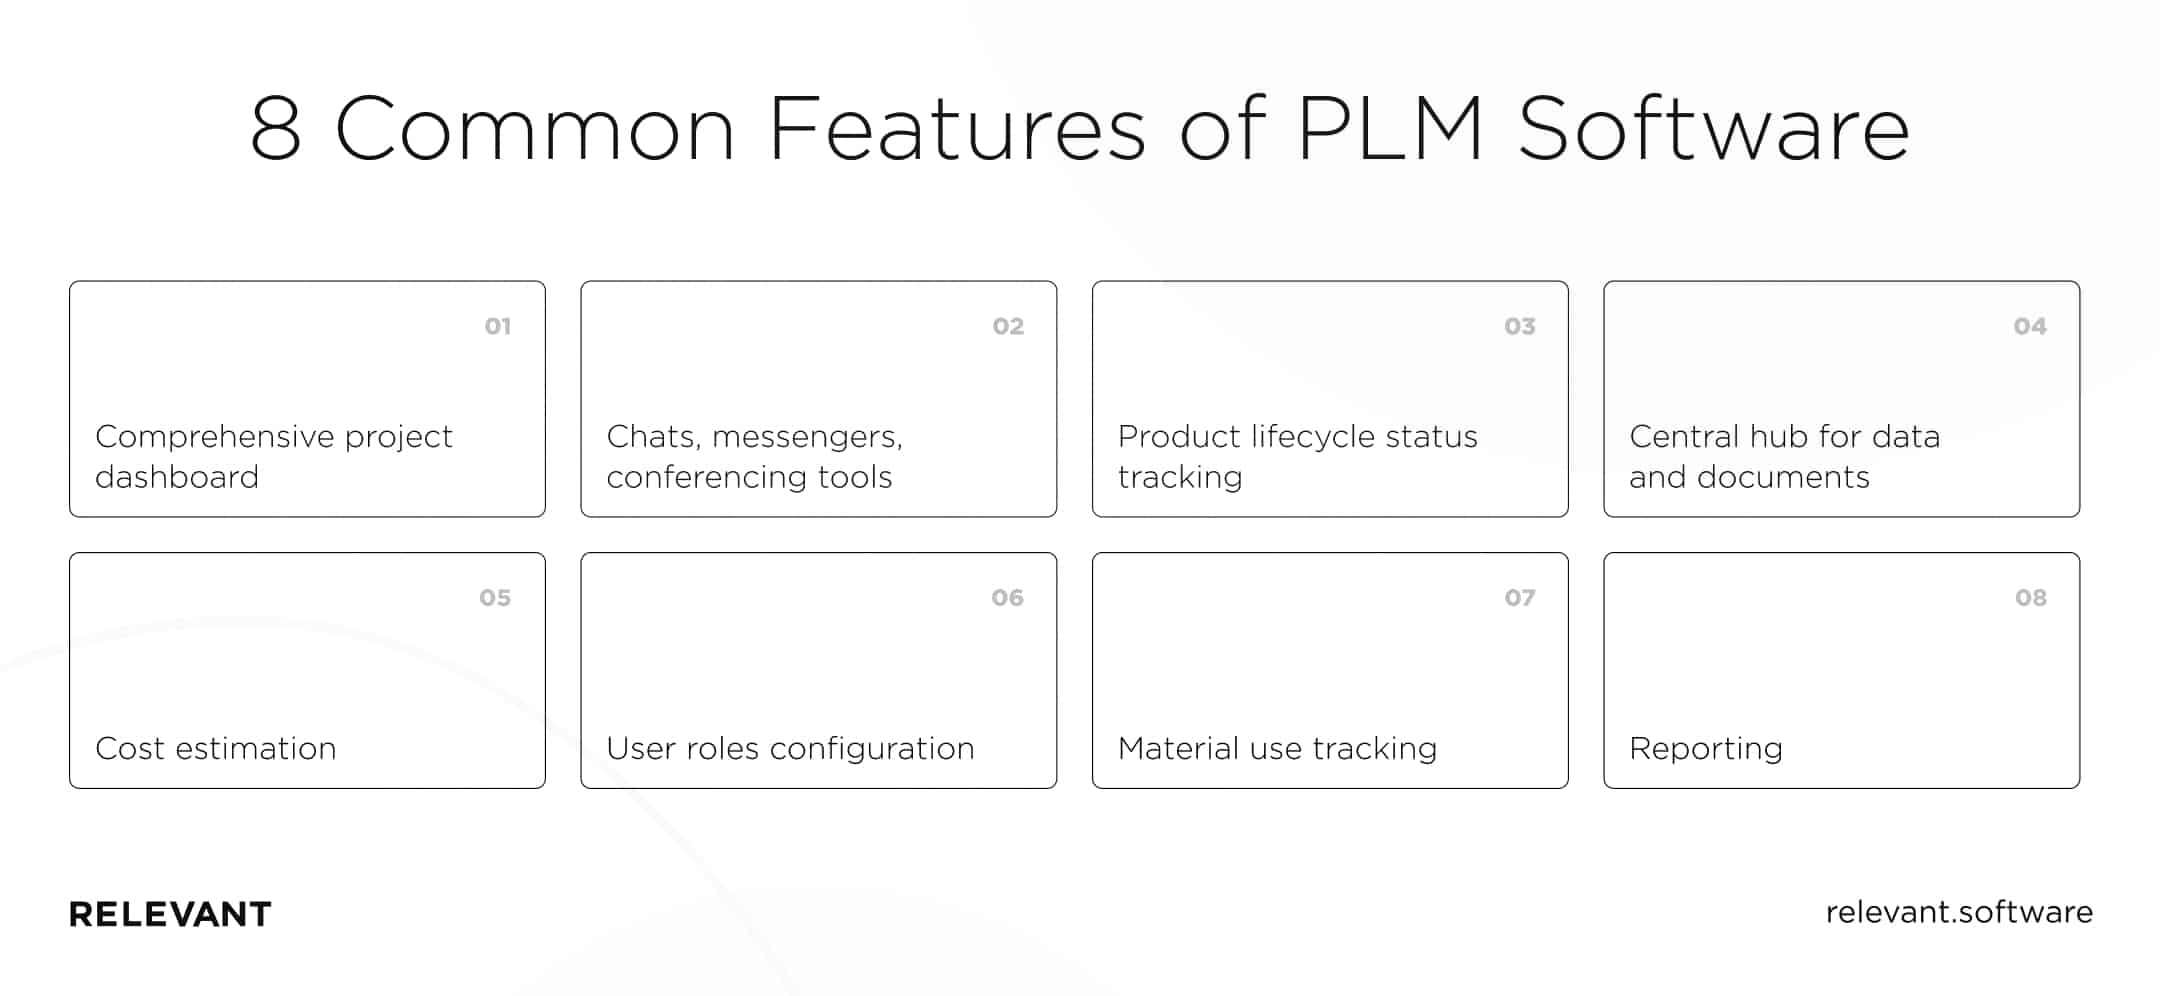 8 Common Features of PLM Software